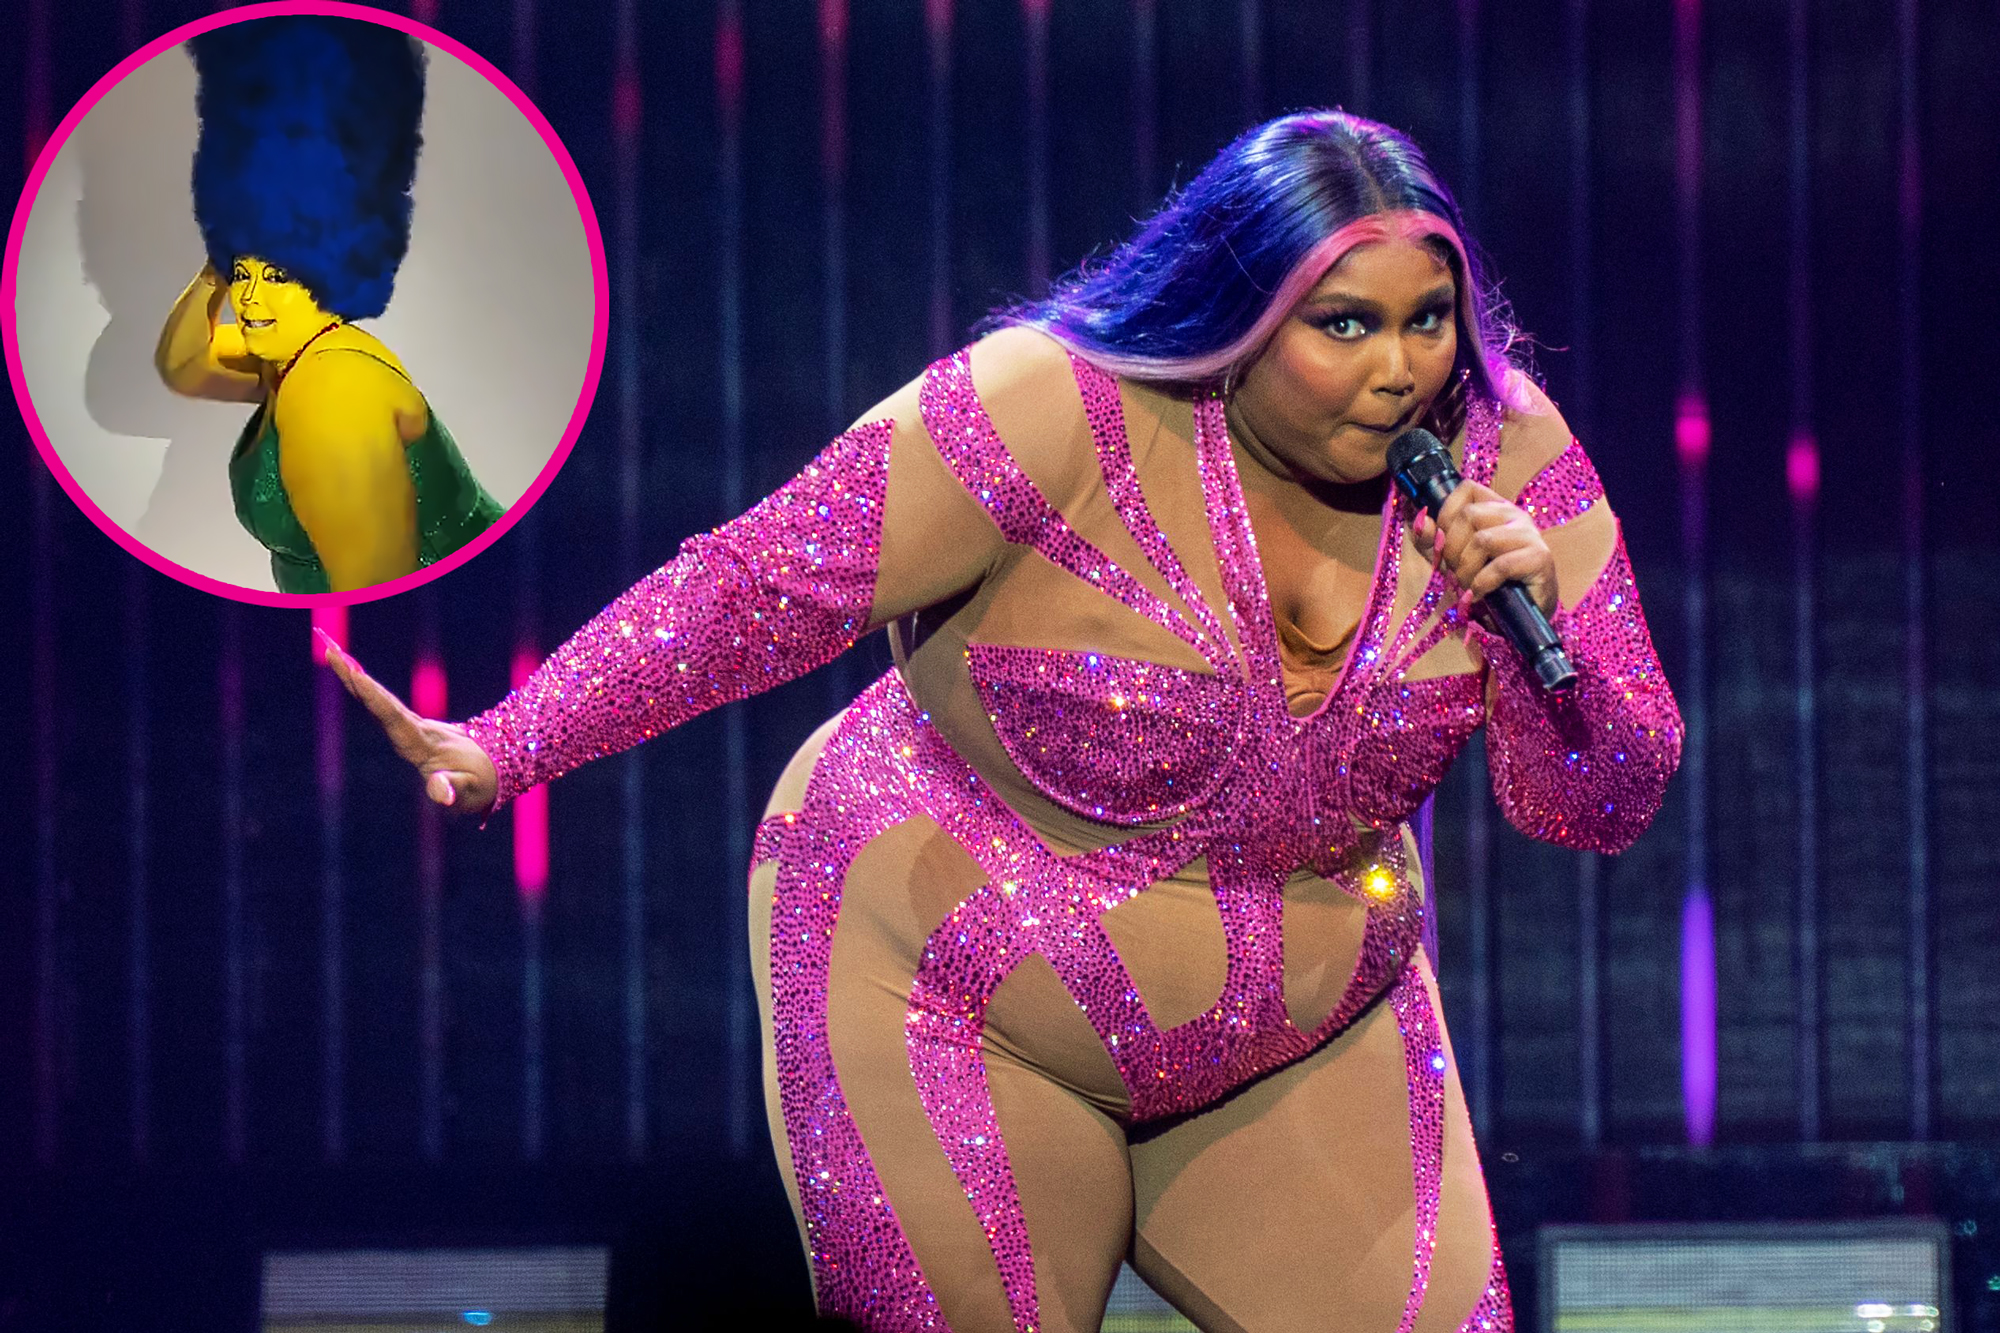 Halloween 2022: Lizzo Wears Blue Wig for Marge Simpson Costume